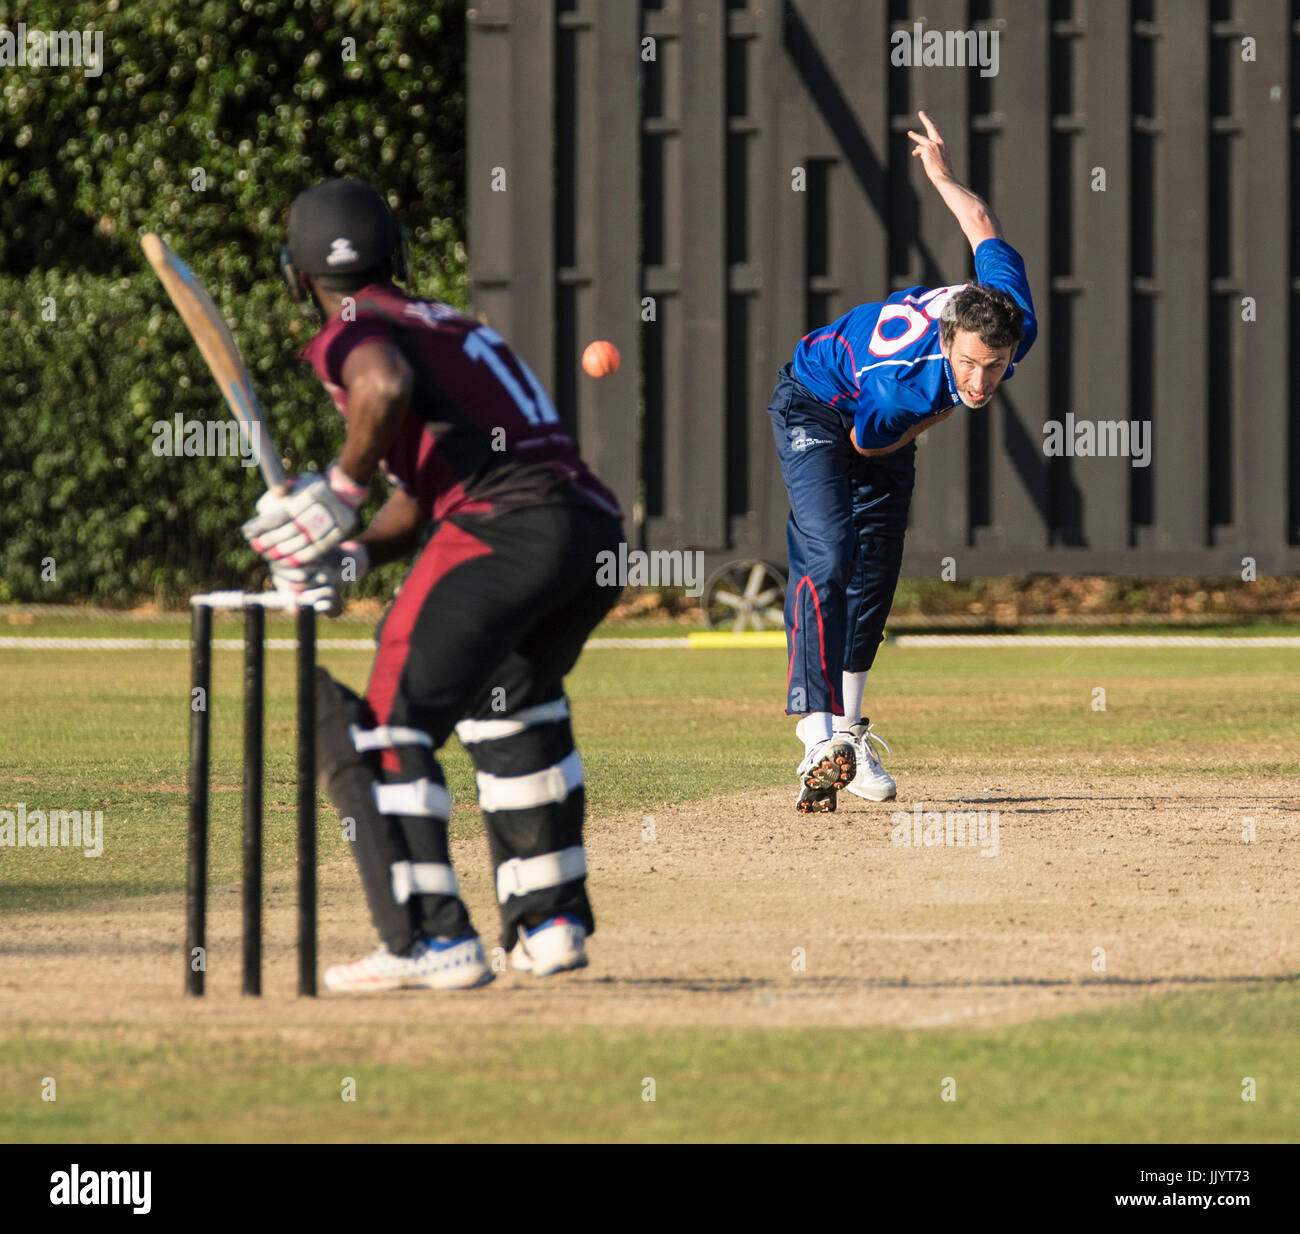 Brentwood, Essex 21st July 2017, Anthony Alleyne bats for Brentwood Cricket Club against the PGA English Master at Brentwood Cricket Club., Graham Onions bowls for the PCA English Masters Credit: Ian Davidson/Alamy Live News Stock Photo